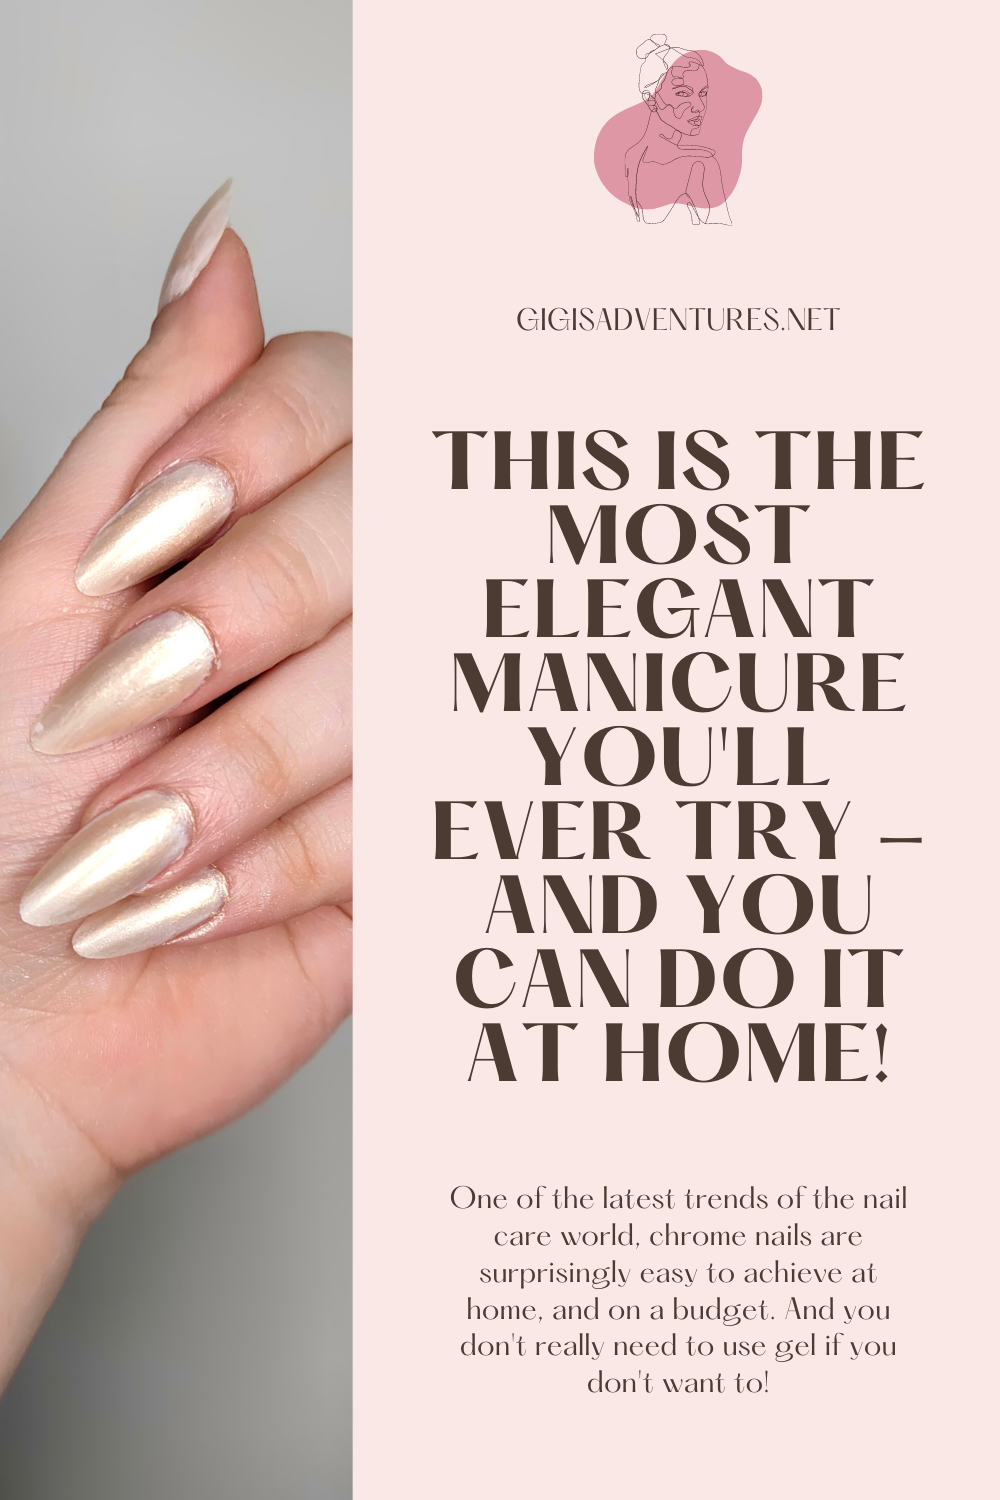 This Is The Most Elegant Manicure You'll Ever Try - And You Can Do It At Home!